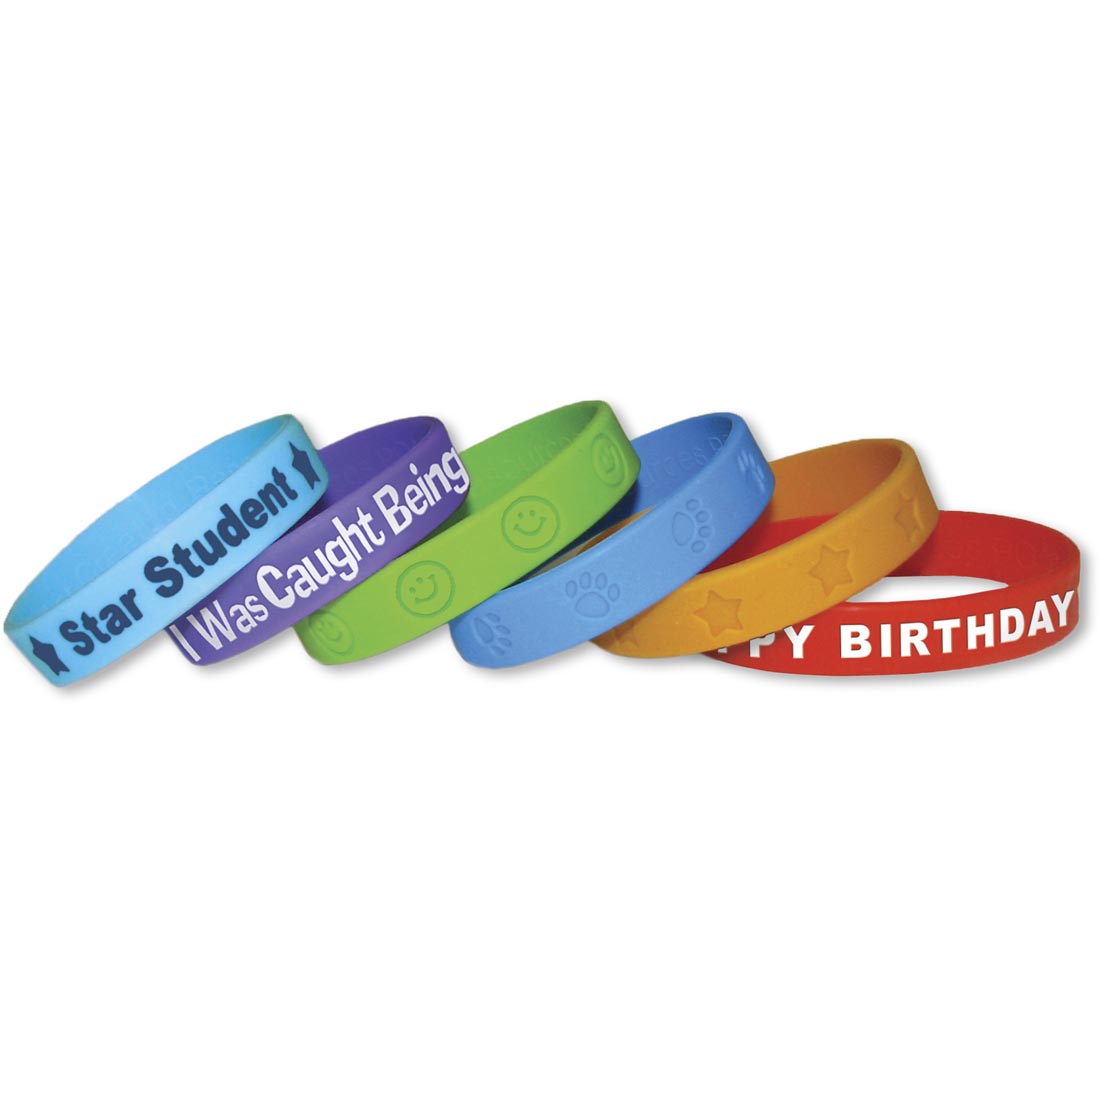 Assorted Wristbands with the words star student, I was caught being good, and happy birthday